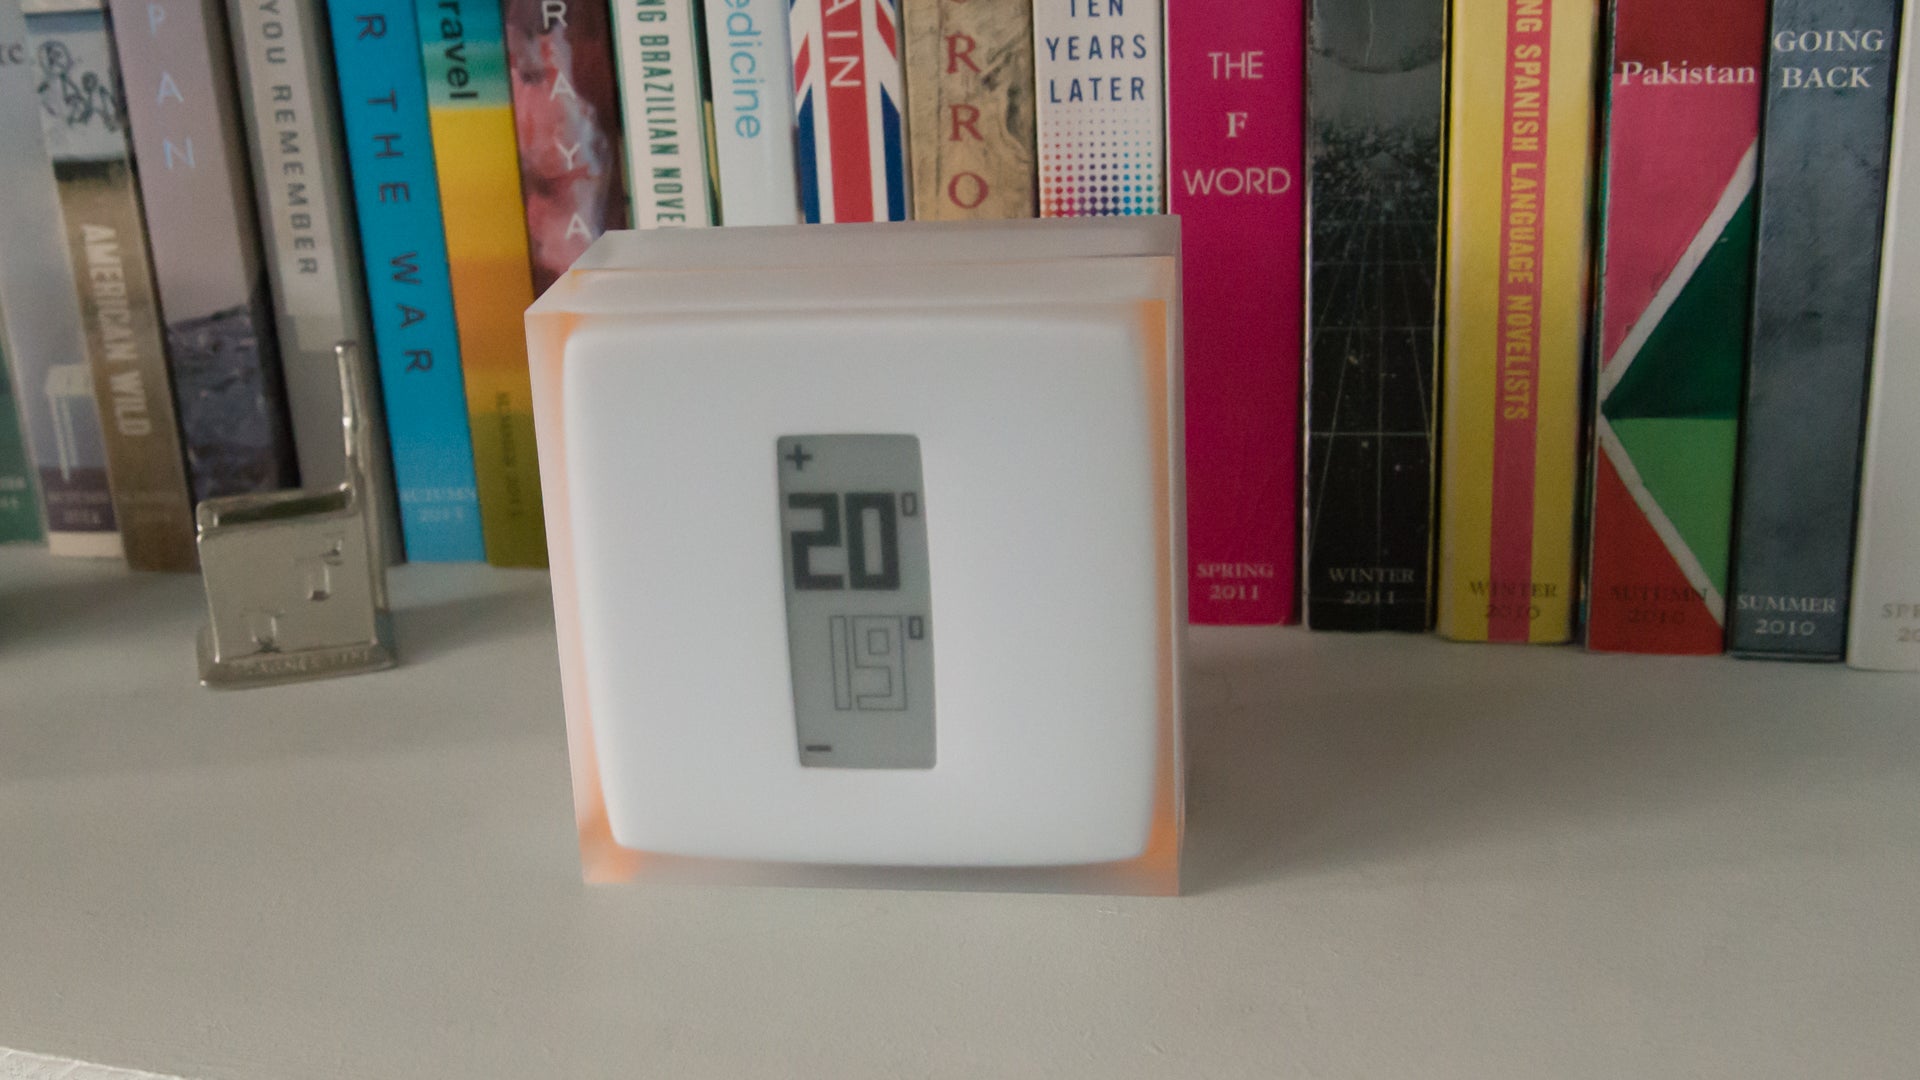 Netatmo Smart Thermostat displaying 20 degrees Celsius.